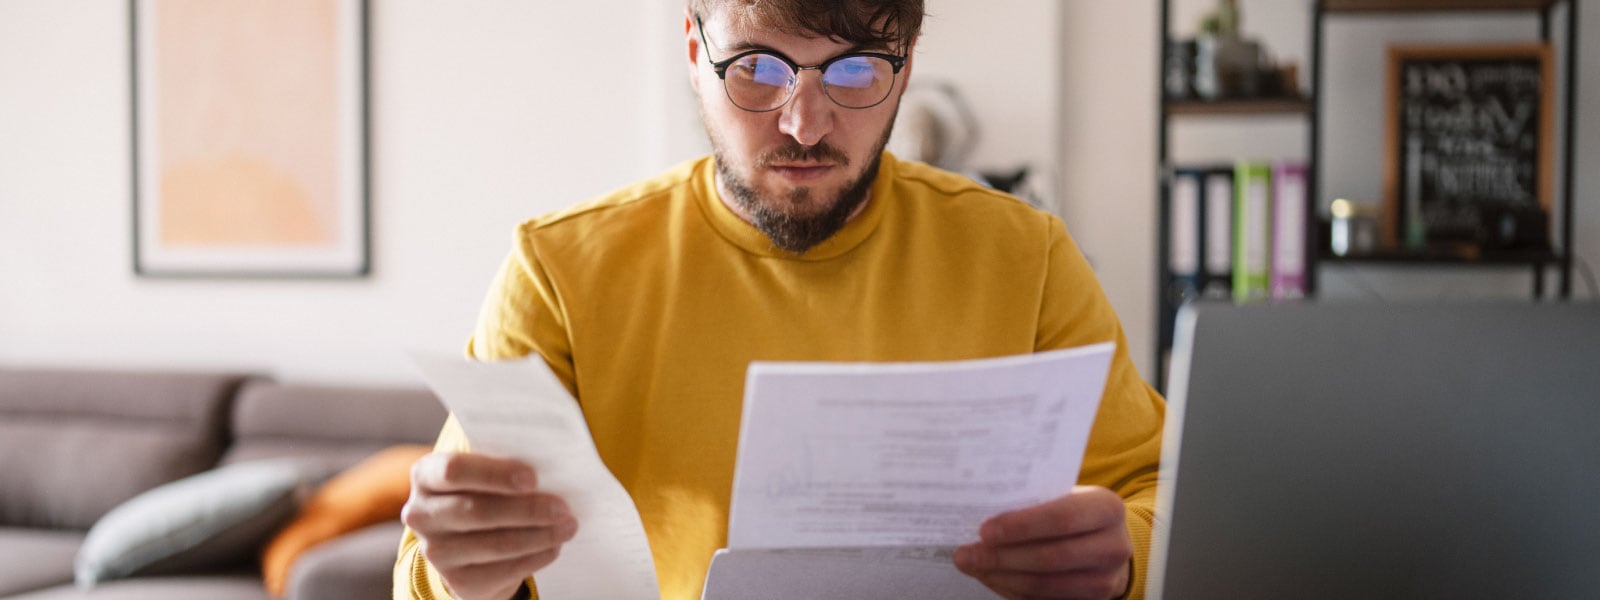 A person reviews their finances to avoid falling prey to tax scams.